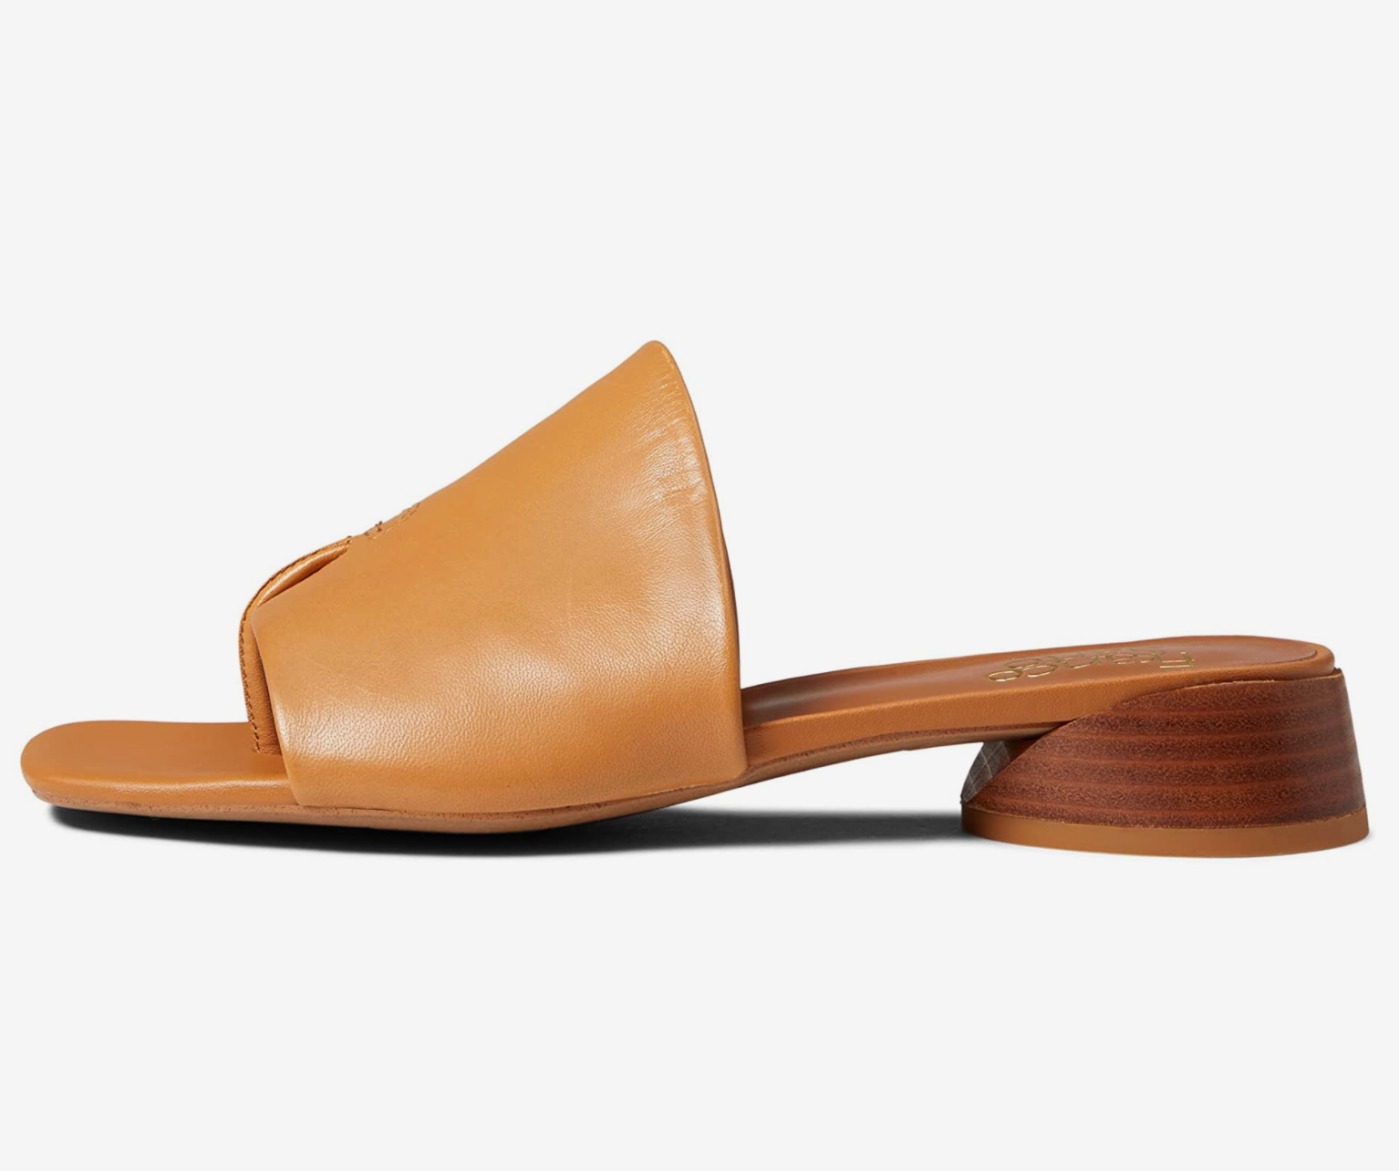 Franco Sarto Leather Sandals Will Be Your Go-To for Spring — On Sale